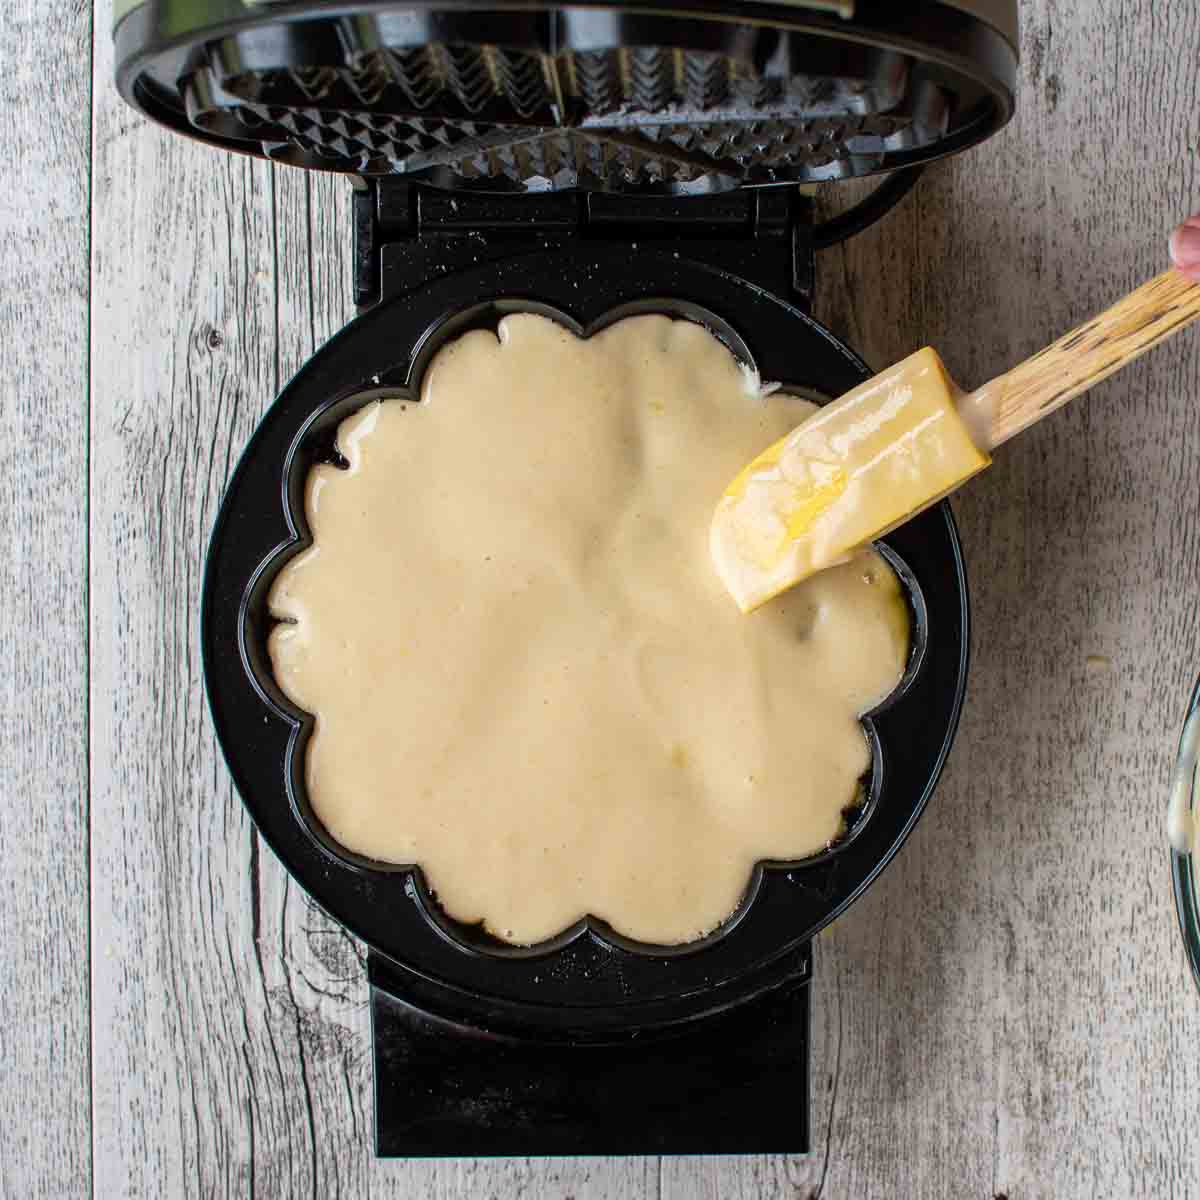 Waffle batter being spread on waffle iron with a yellow spatula viewed from above.